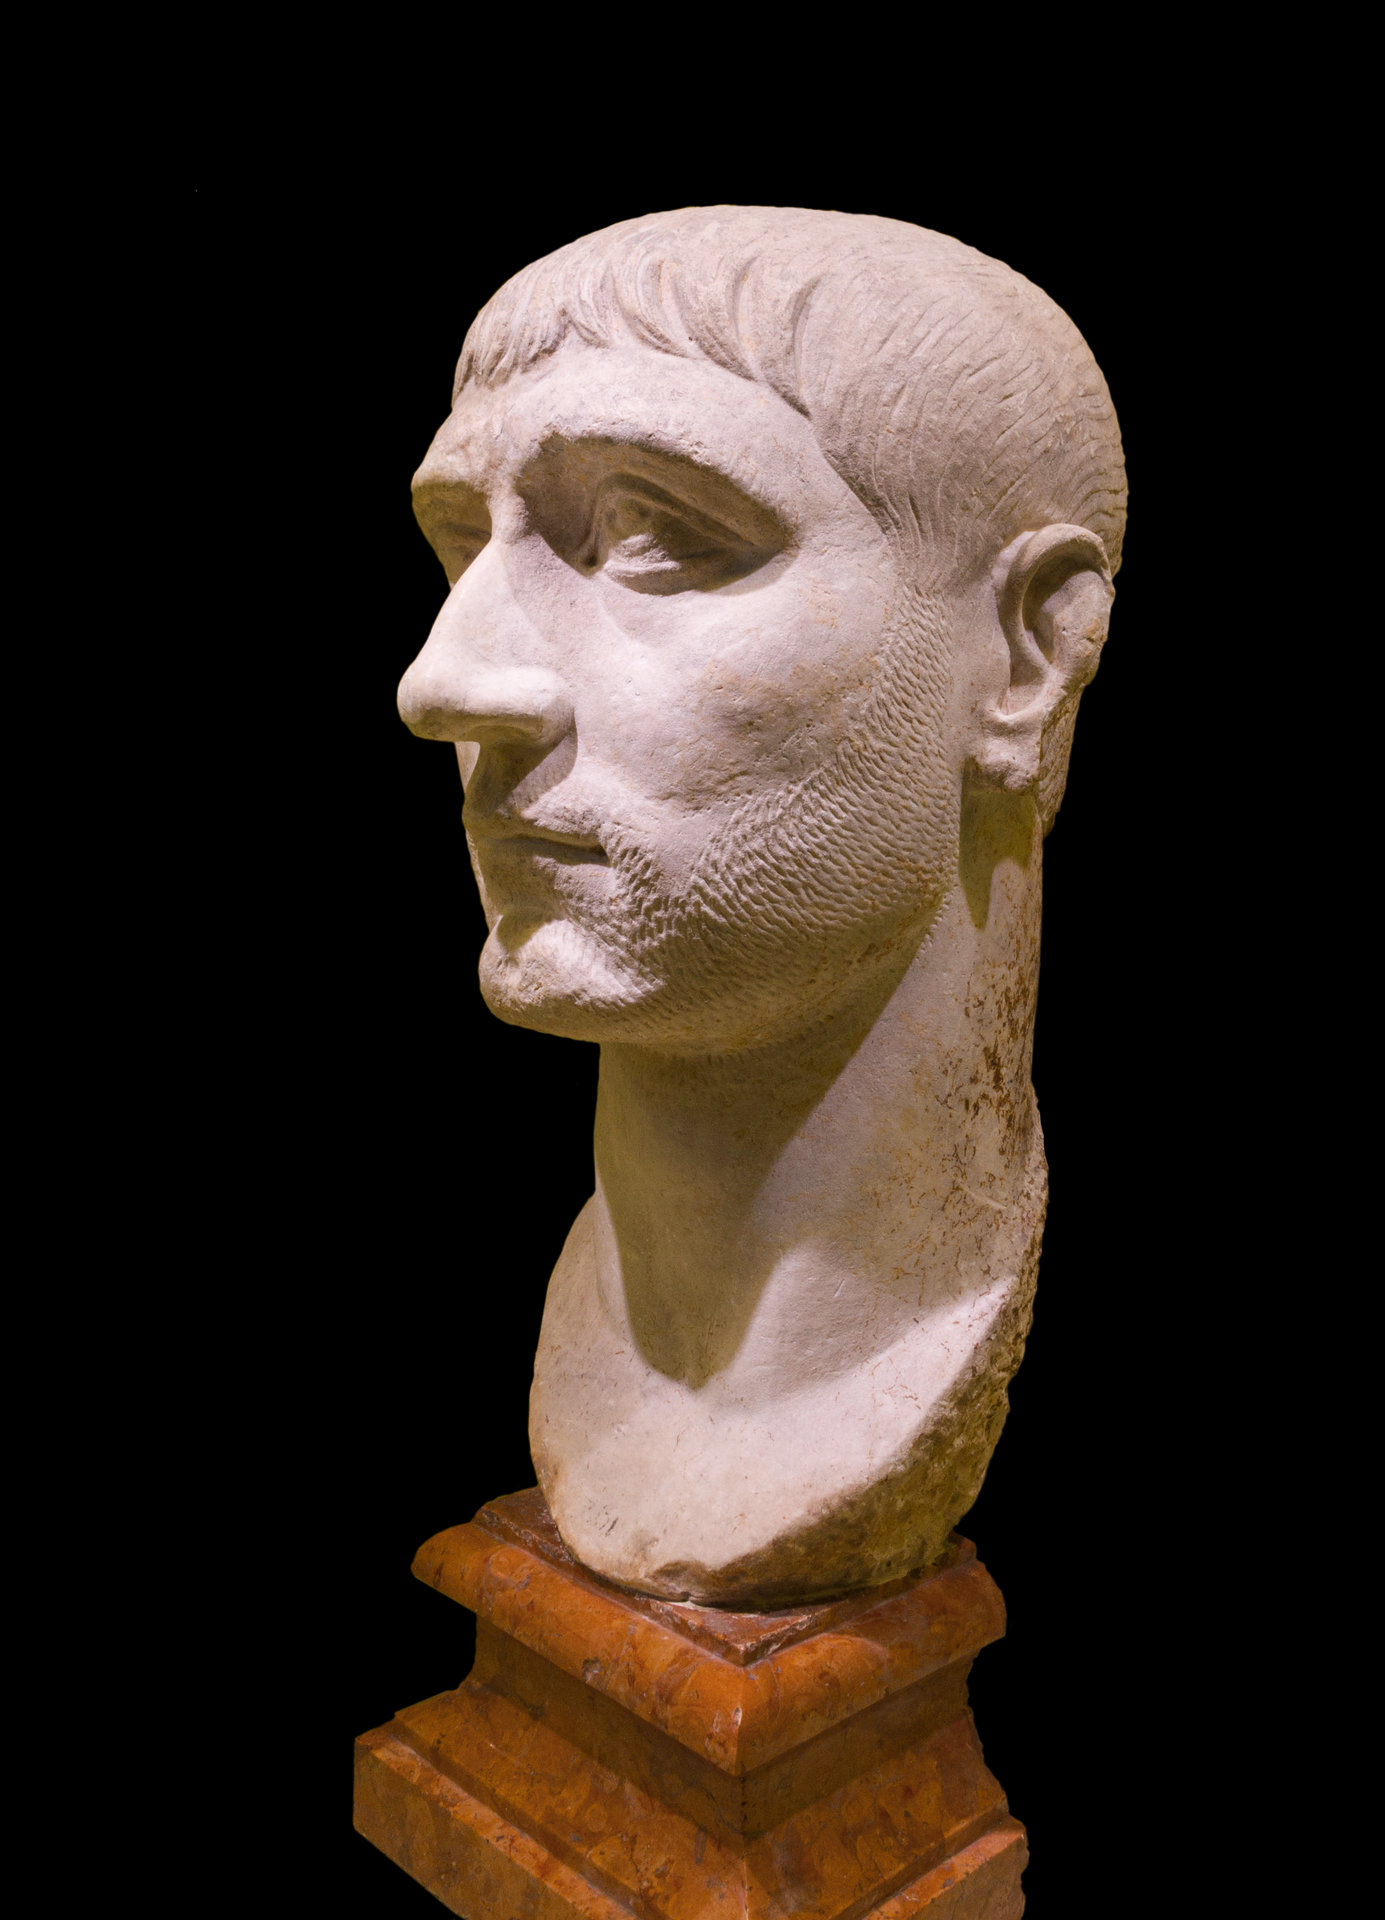 Head_of_Maxentius_from_Dresden_Colosseum_Rome_Italy.jpg